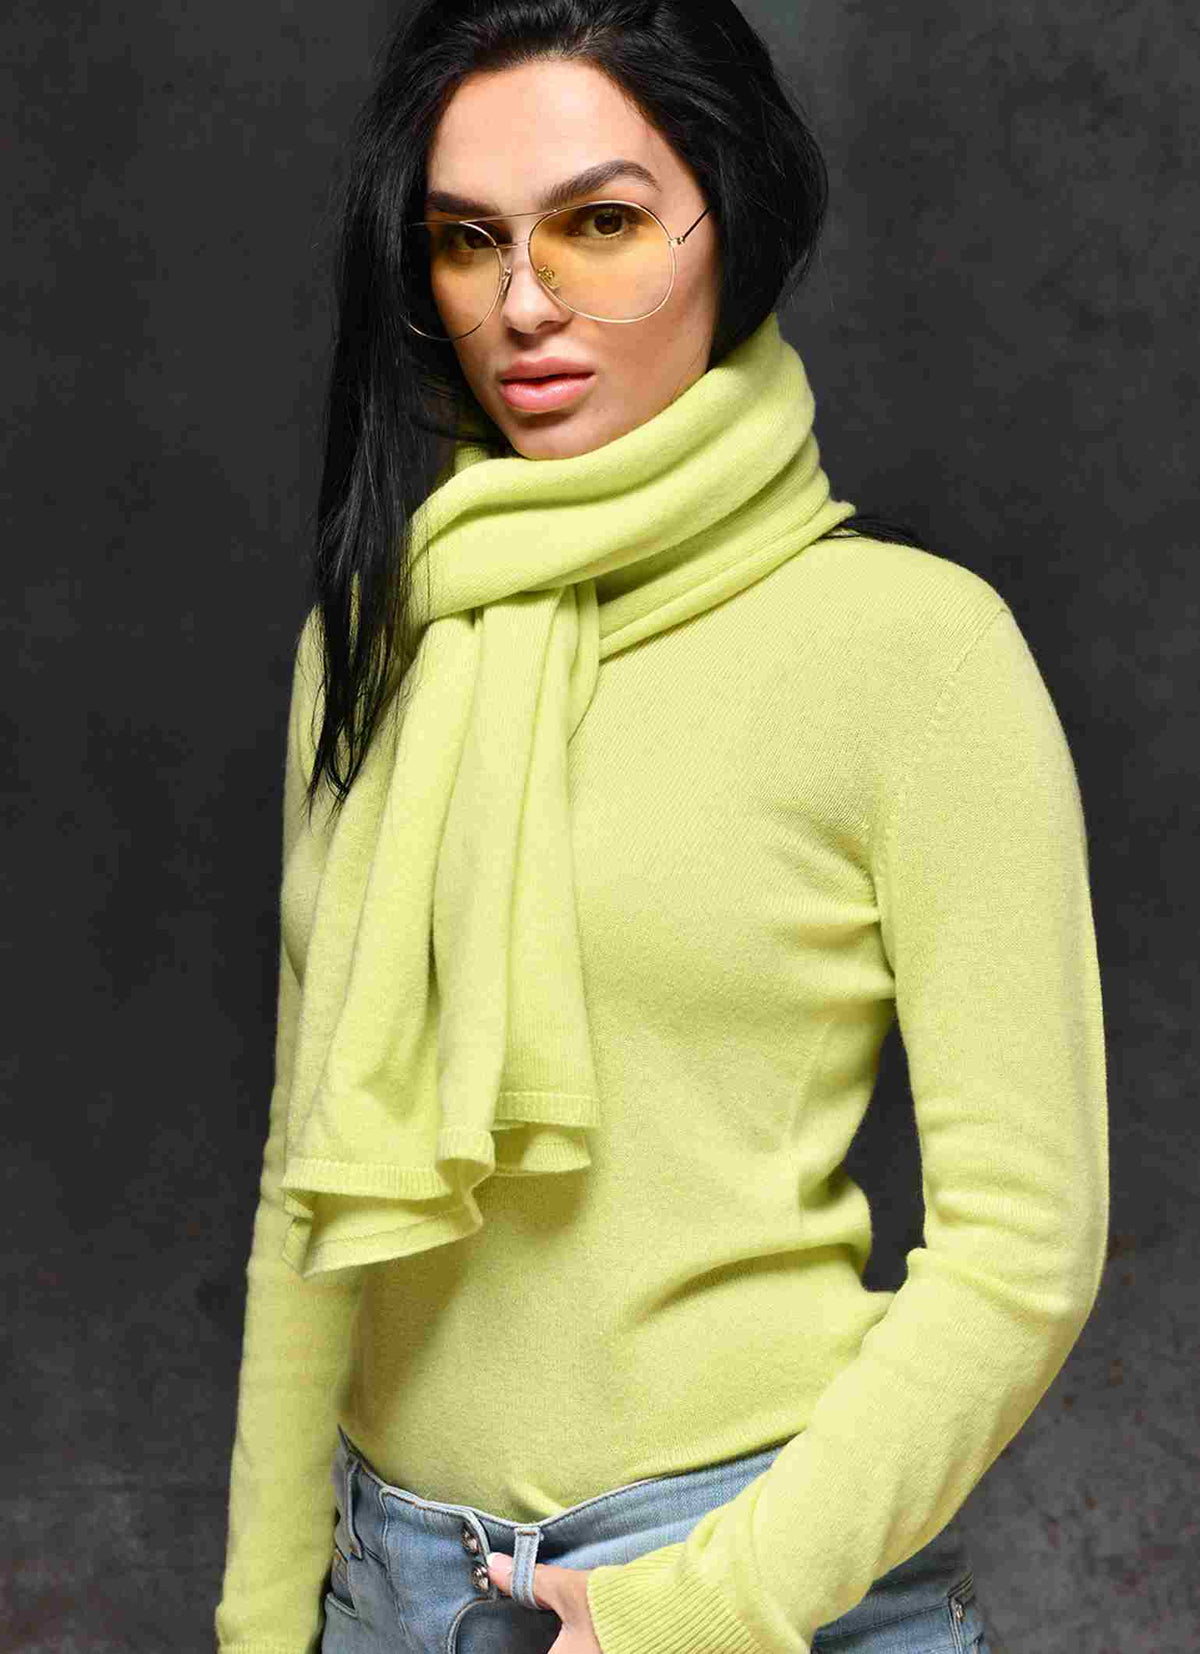 Women wearing made in Italy cashmere shawl with Carmen Sol cashmere in color yellow